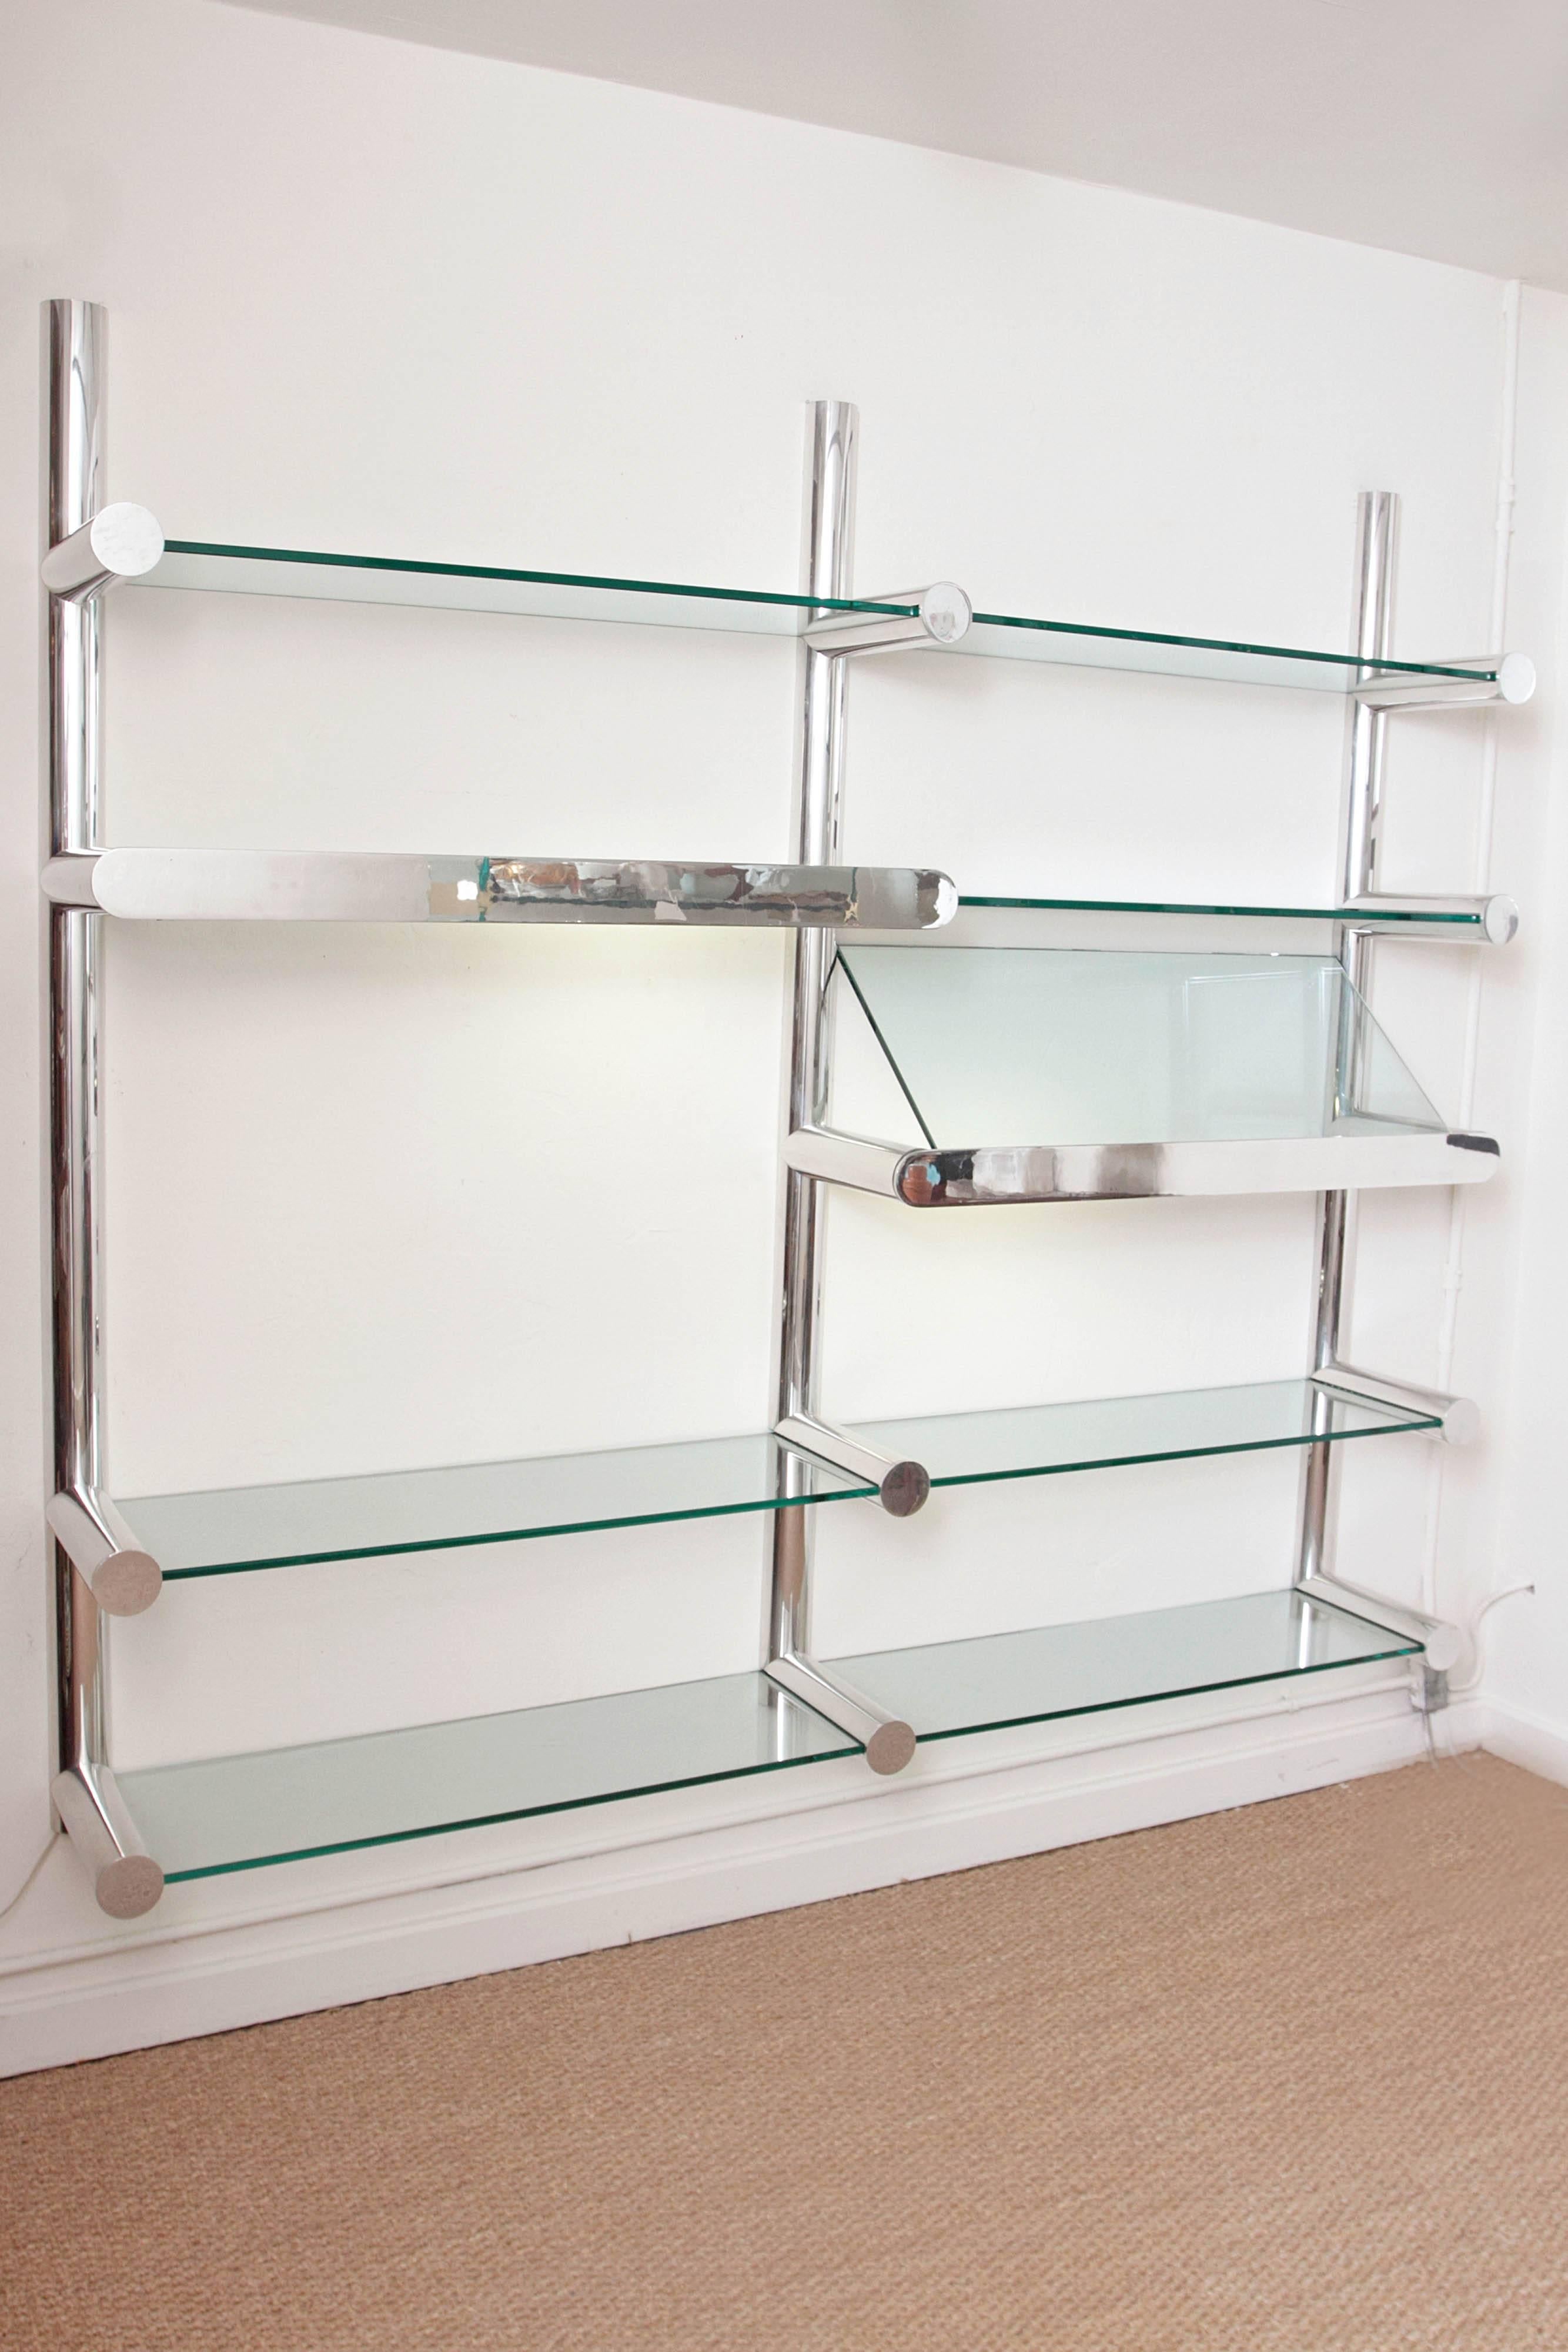 A wall-mounted polished aluminum and glass shelving unit with built in illumination. The polished plate front conceals two narrow florescent tubes which shine up and down.

They were manufactured in the 1970s in the USA.